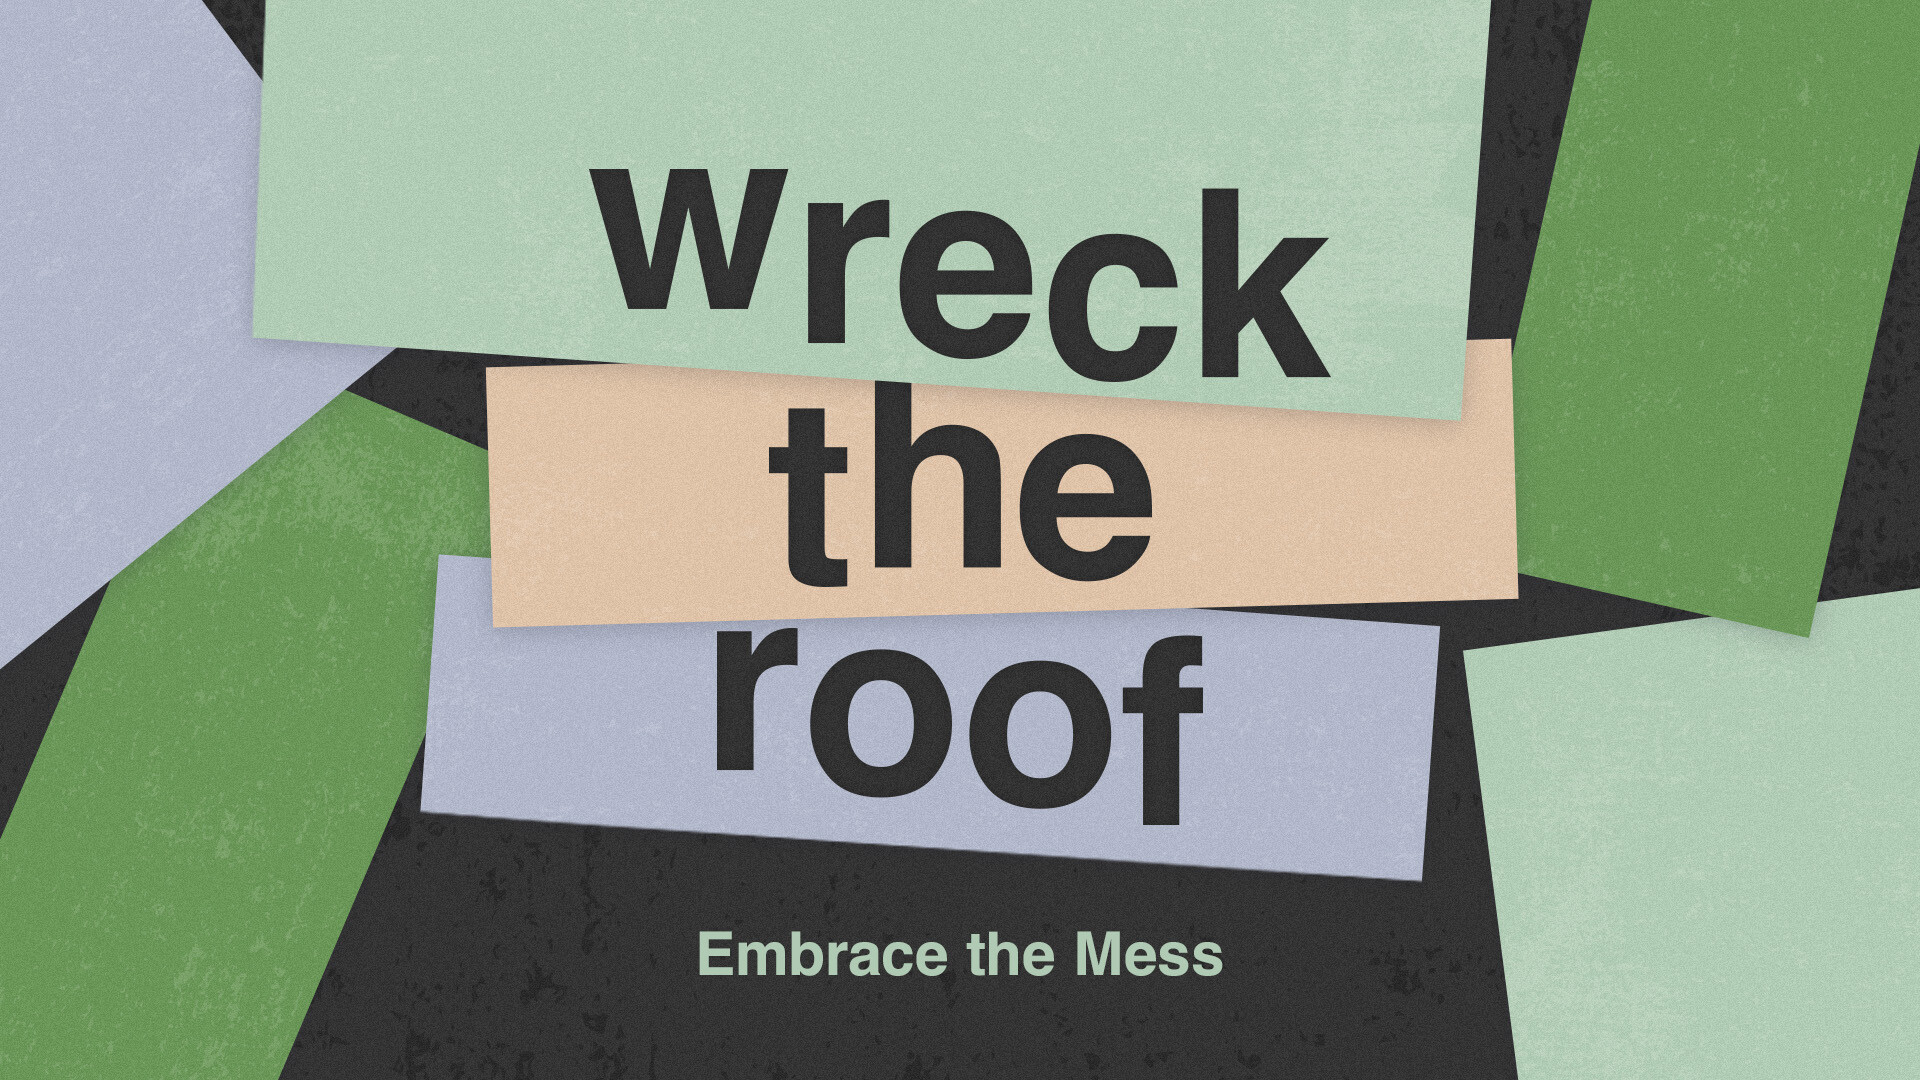 Embrace the Mess